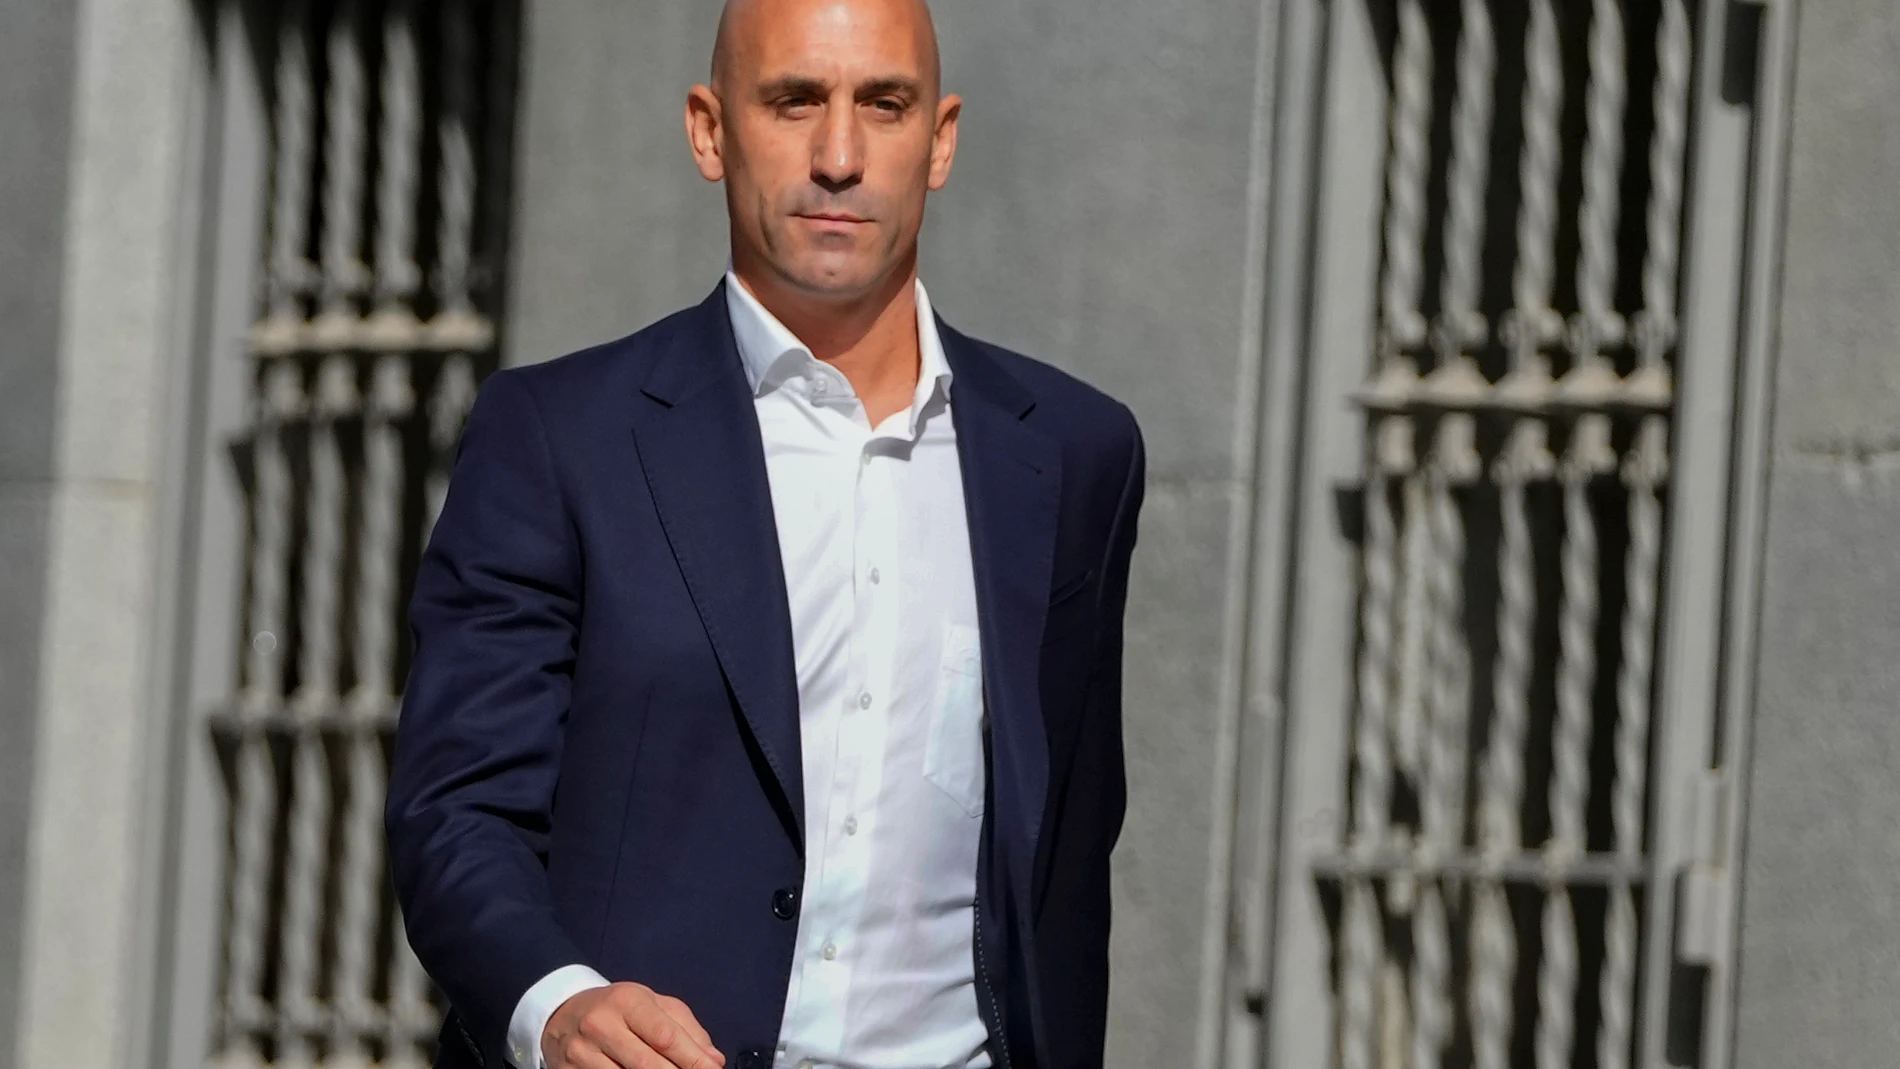 FILE - Former president of Spain's soccer federation Luis Rubiales arrives at the National Court in Madrid, Spain, Friday, Sept. 15, 2023. FIFA has banned ousted former Spanish soccer federation president Luis Rubiales from the sport for three years. He was judged for misconduct at the Women’s World Cup final where he forcibly kissed a player on the lips at the trophy ceremony. FIFA did not publish details of the verdict reached by its disciplinary committee judges. (AP Photo/Manu Fernandez, ...